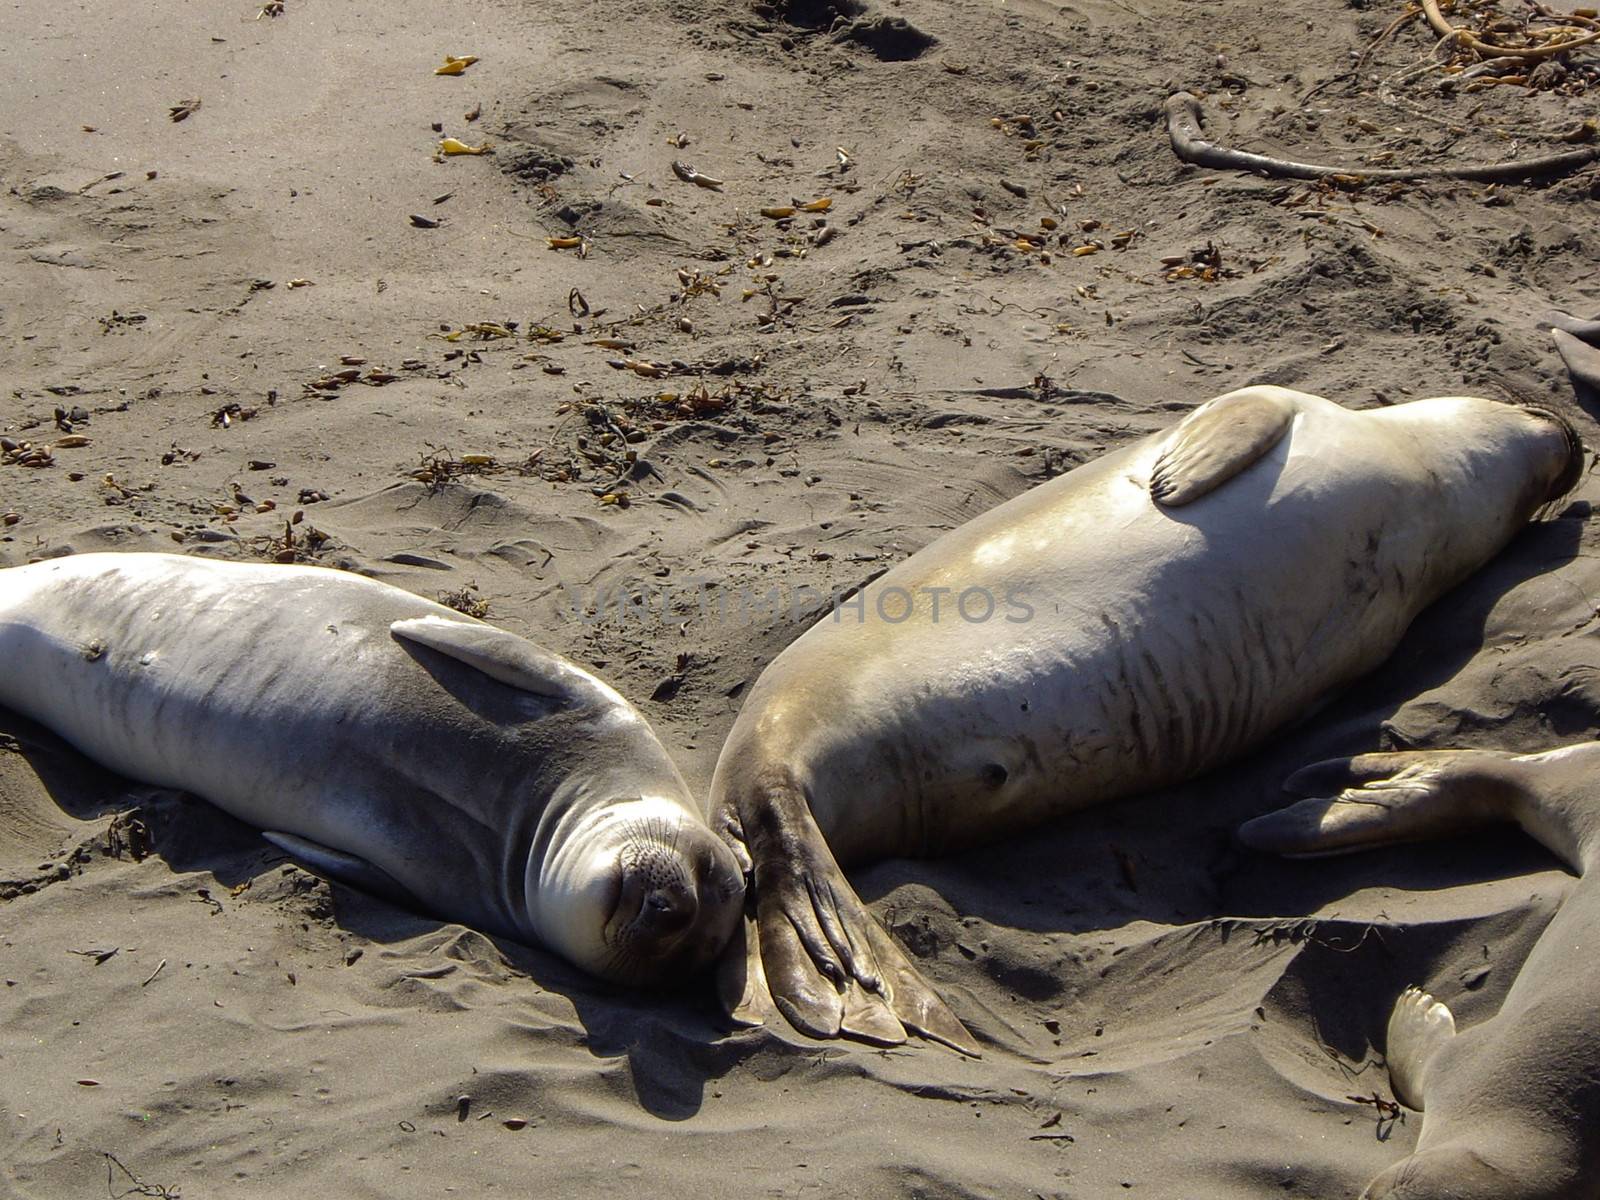 Sleeping Elephant Seals Head to Tail by emattil